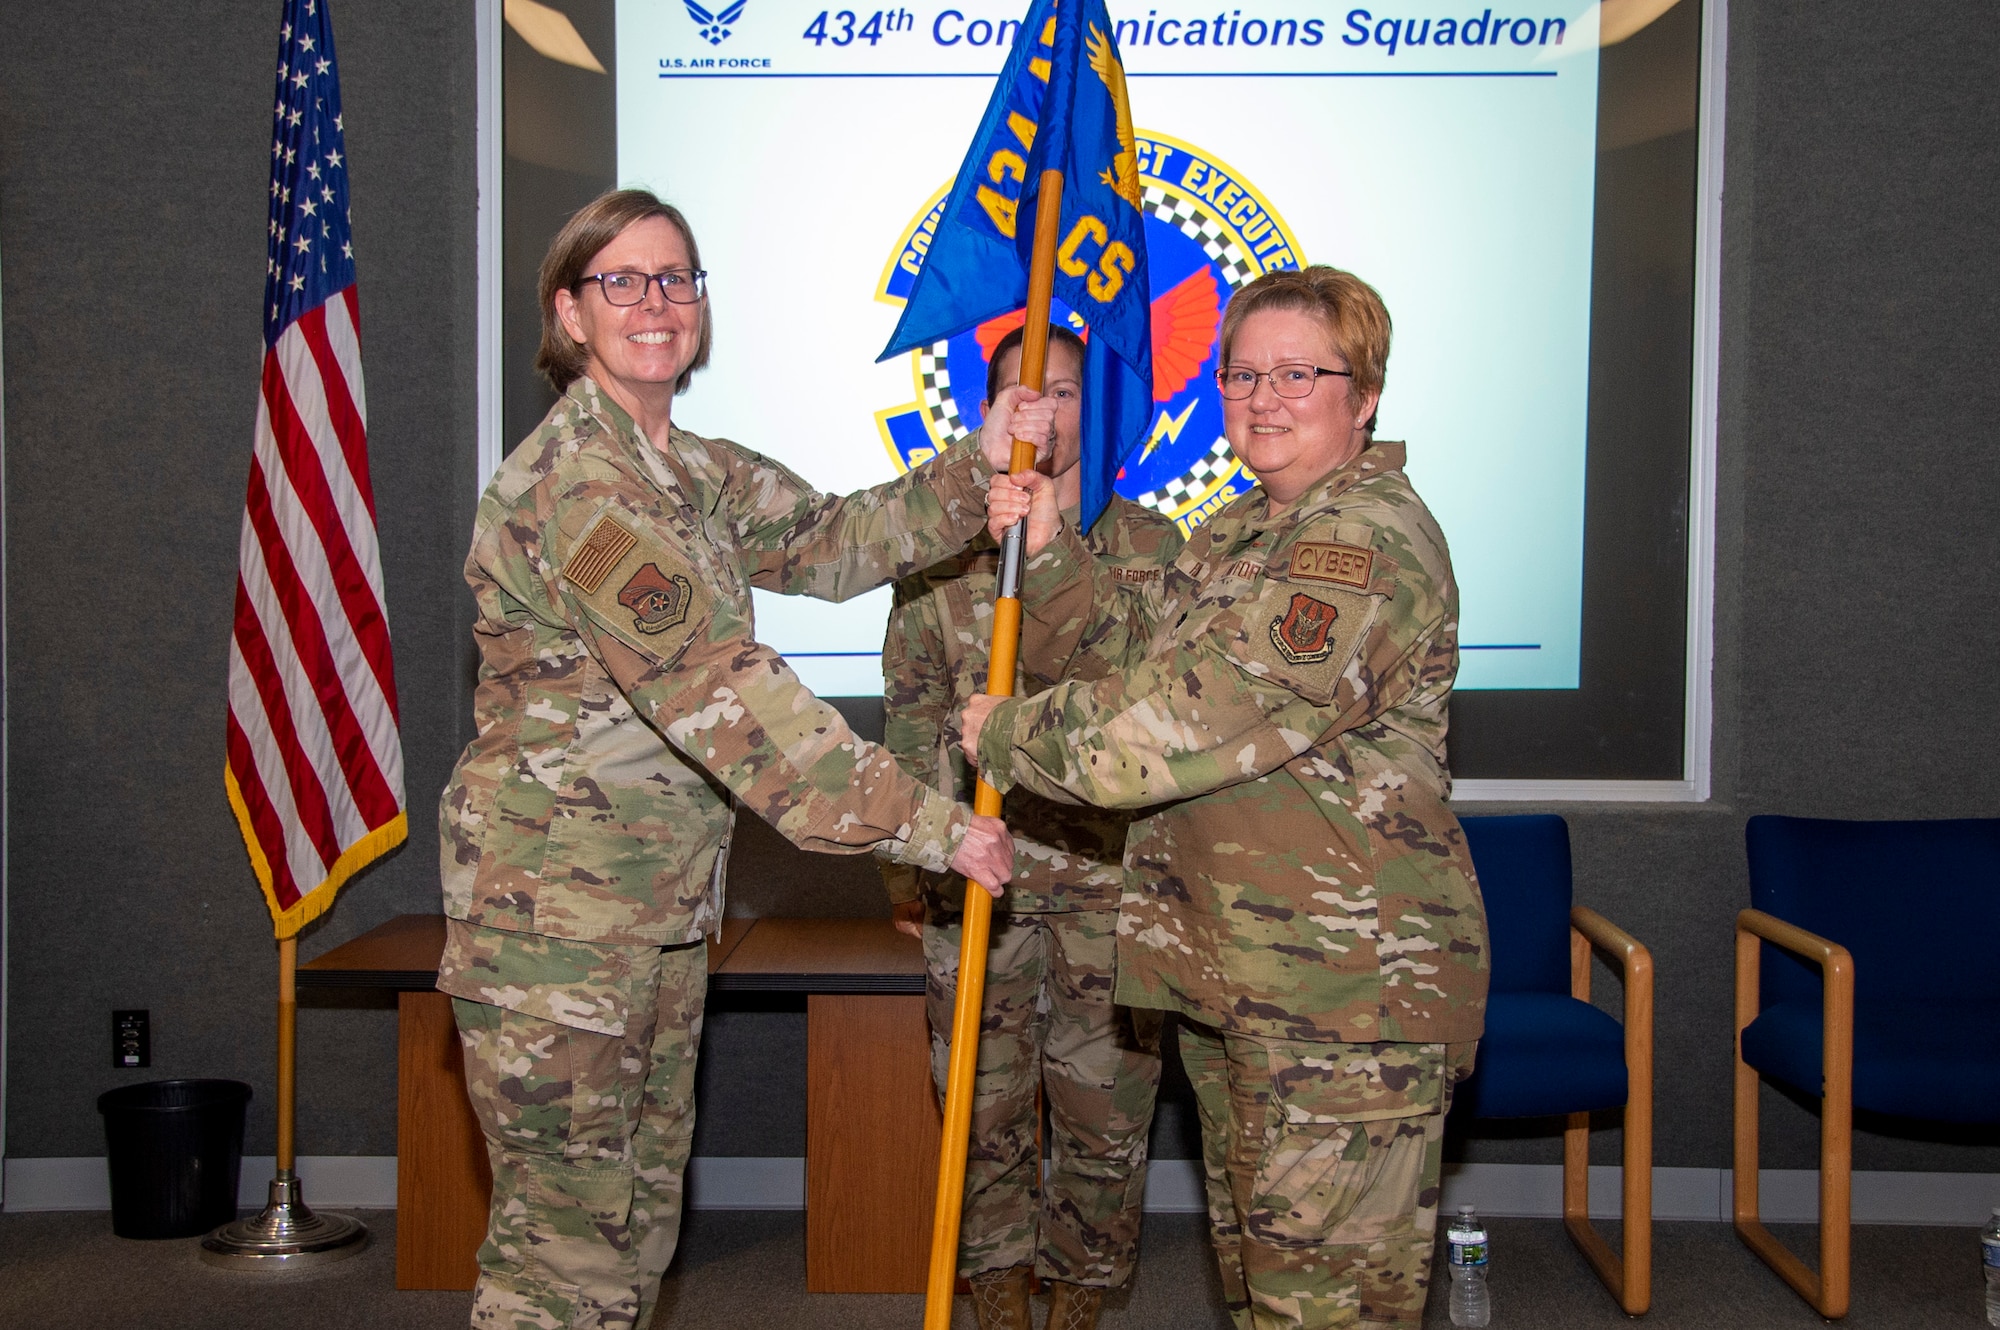 Col. Gretchen Wiltse, 434th Mission Support Group commander, hands the 434th Communications Squadron guidon to Lt. Col. Gwendoyln Fulton during an assumption of command ceremony at Gus Grissom Hall, Aug. 6, 2022. The passing of the guidon represents a transfer of responsibility and authority of a unit from one leader to the next. (U.S. Air Force photo by Staff Sgt. Michael Hunsaker)